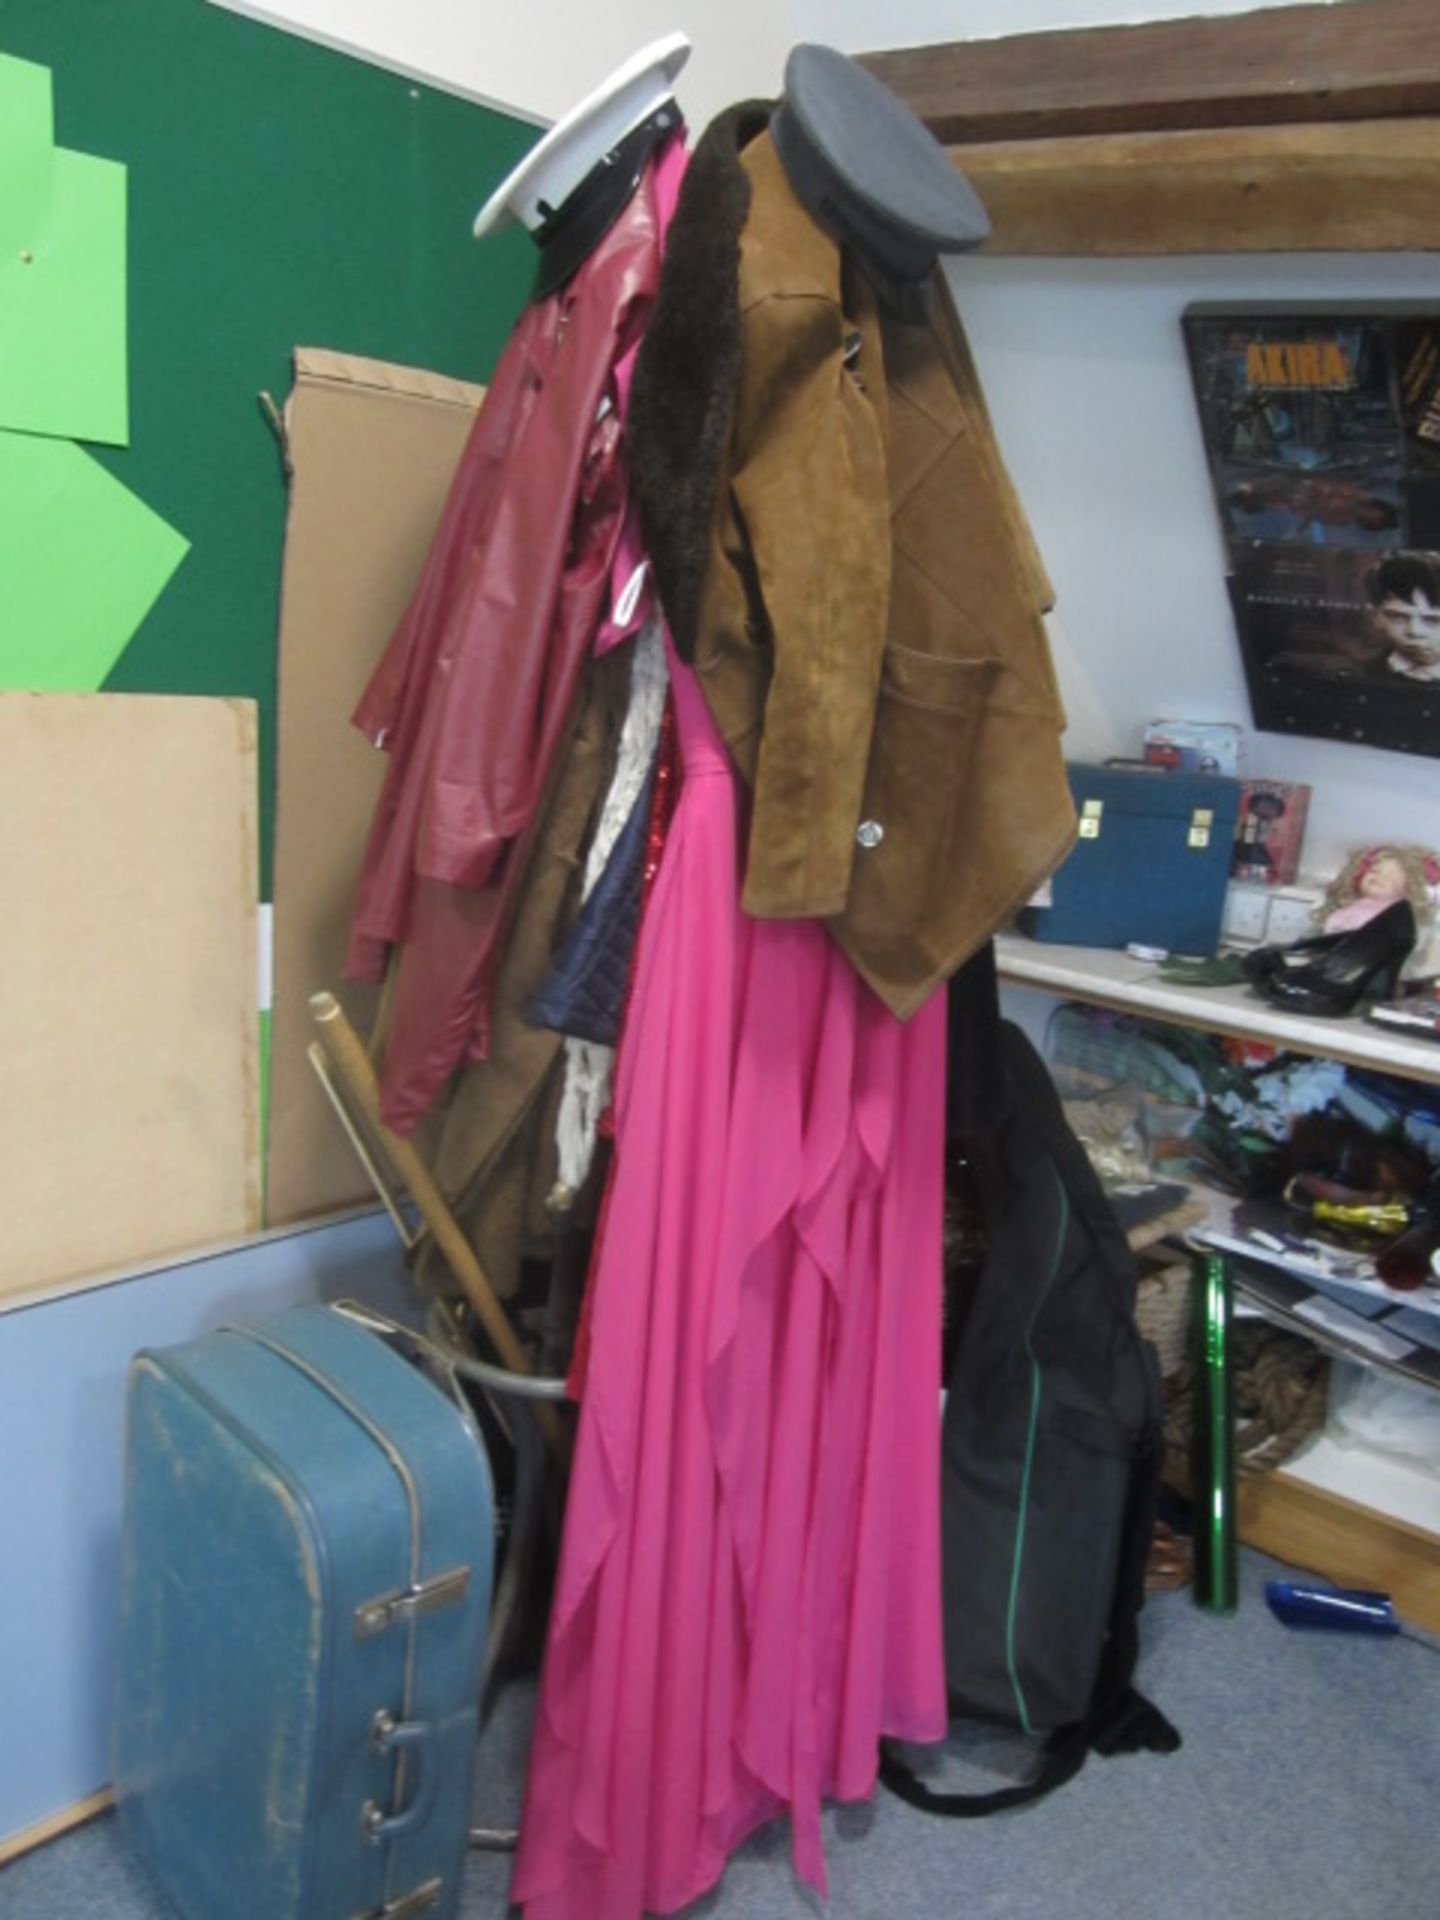 Remaining loose contents of room including dressing up costumes, hair accessories, DVD's, books,